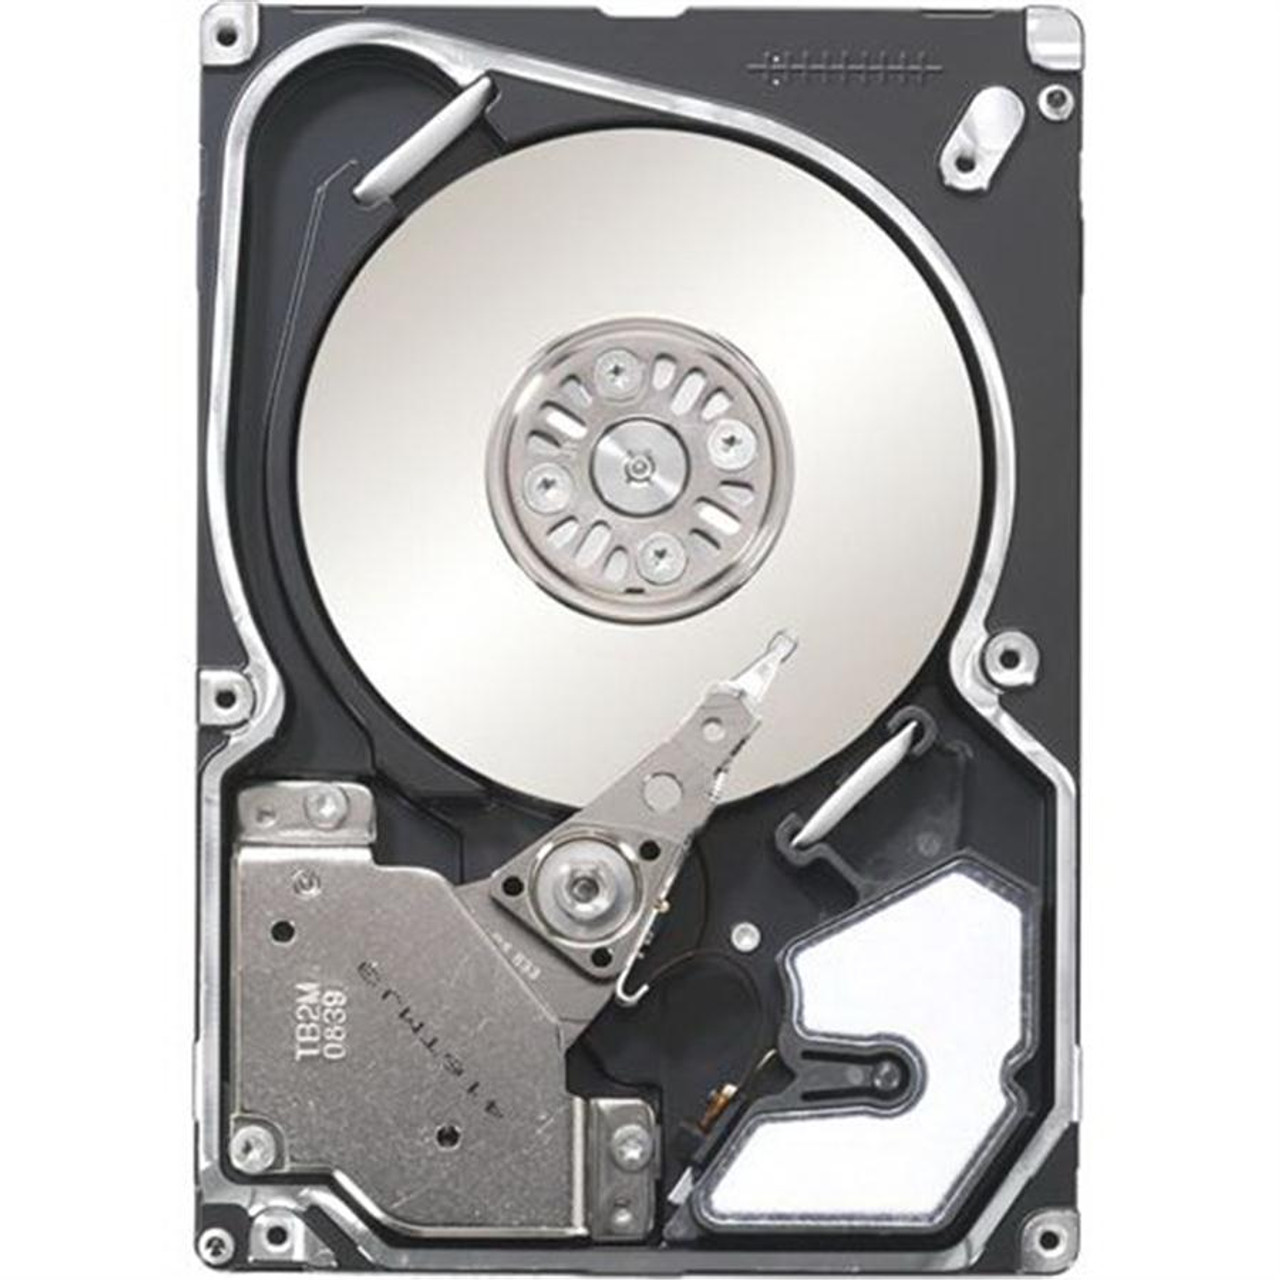 9SW066-002 - Seagate 300GB 15000RPM SAS 6.0Gbps 64MB Cache 2.5-inch Hard Drive